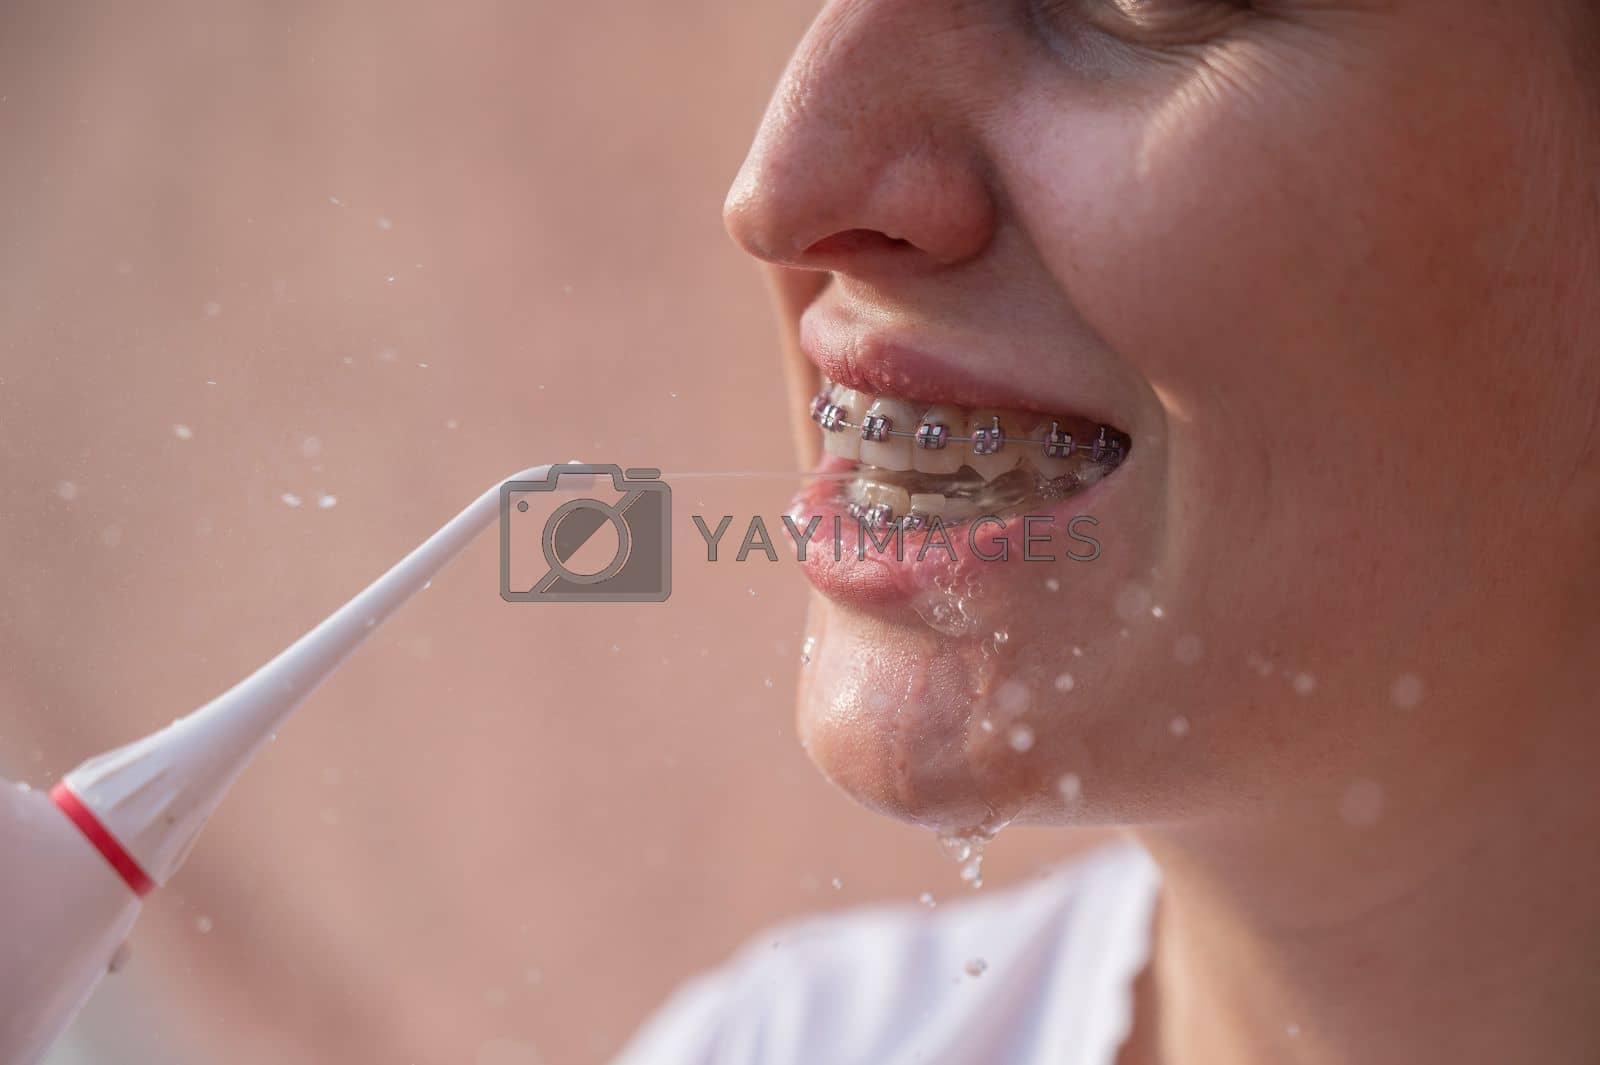 Royalty free image of A woman with braces on her teeth uses an irrigator. Close-up portrait. by mrwed54